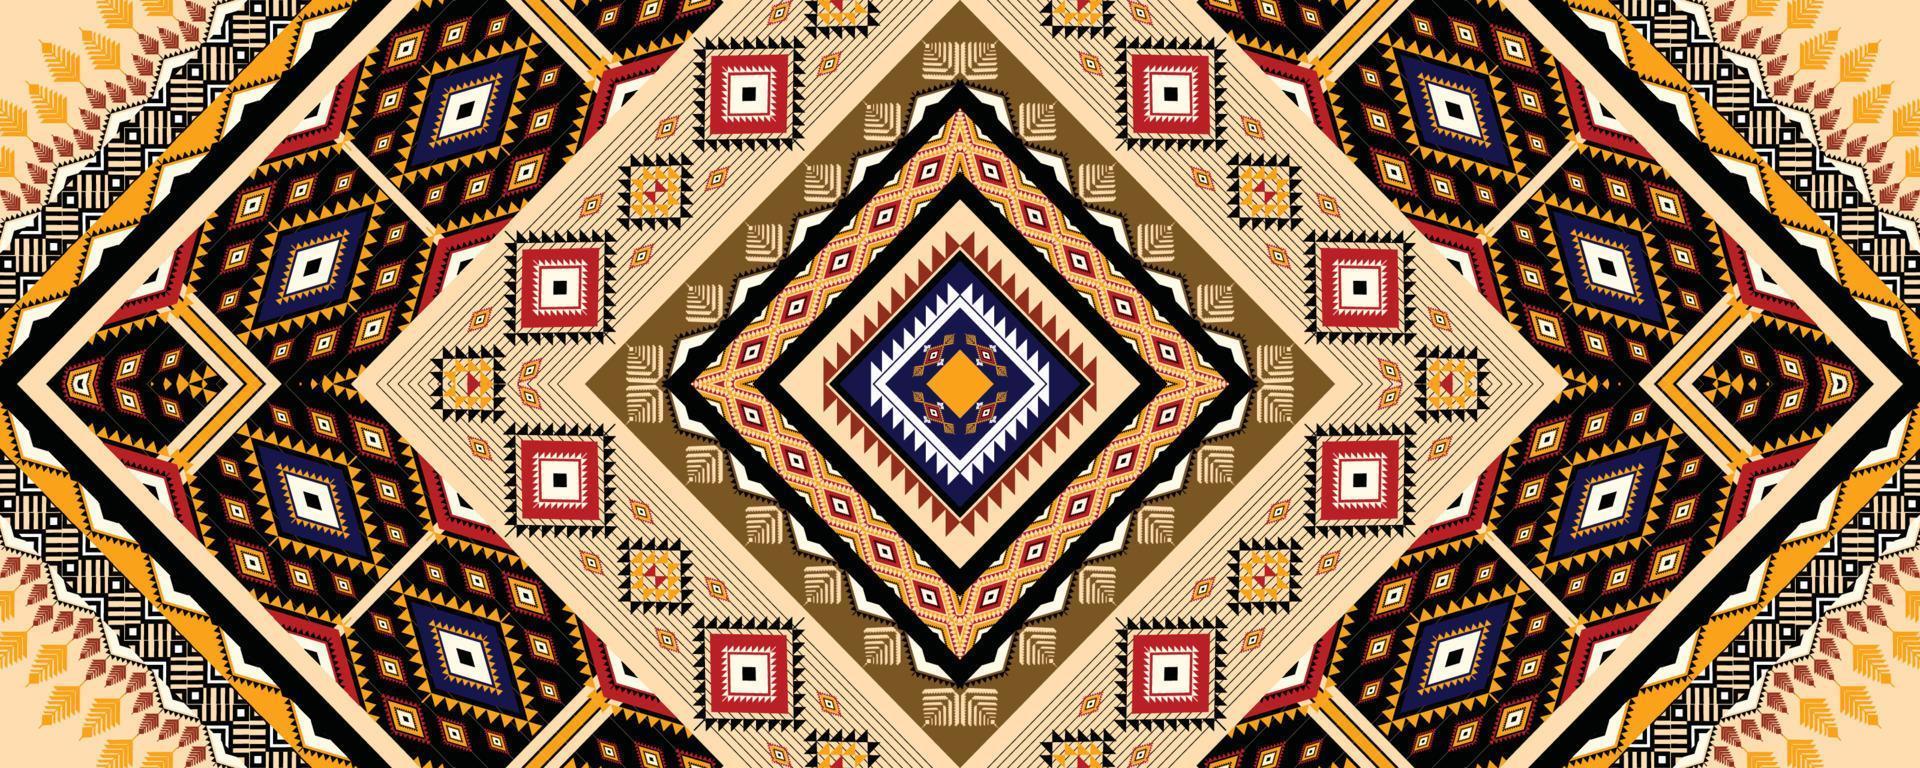 Ethnic geometric American, western, Aztec motif pattern style seamless pattern design for fabric, curtain, background, sarong, wallpaper, clothing, wrapping, Batik, tile, interior.Vector illustration. vector